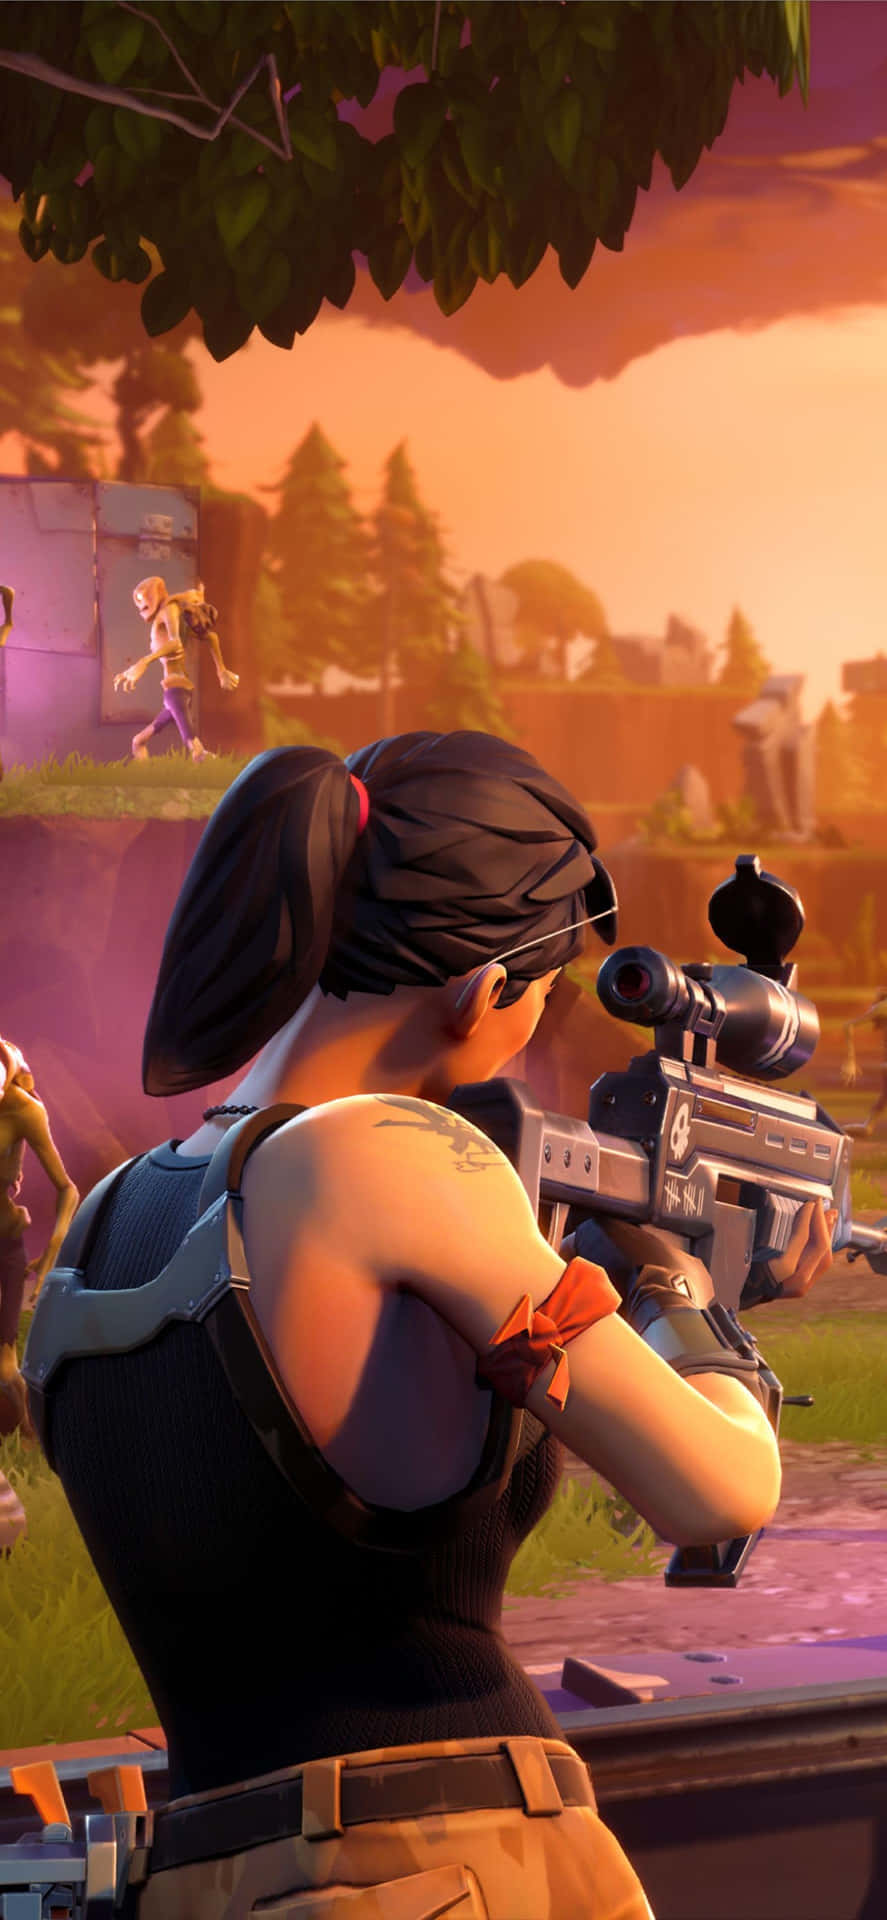 Dominate the Battle Royale with the Fortnite Poised Playmaker Skin Wallpaper